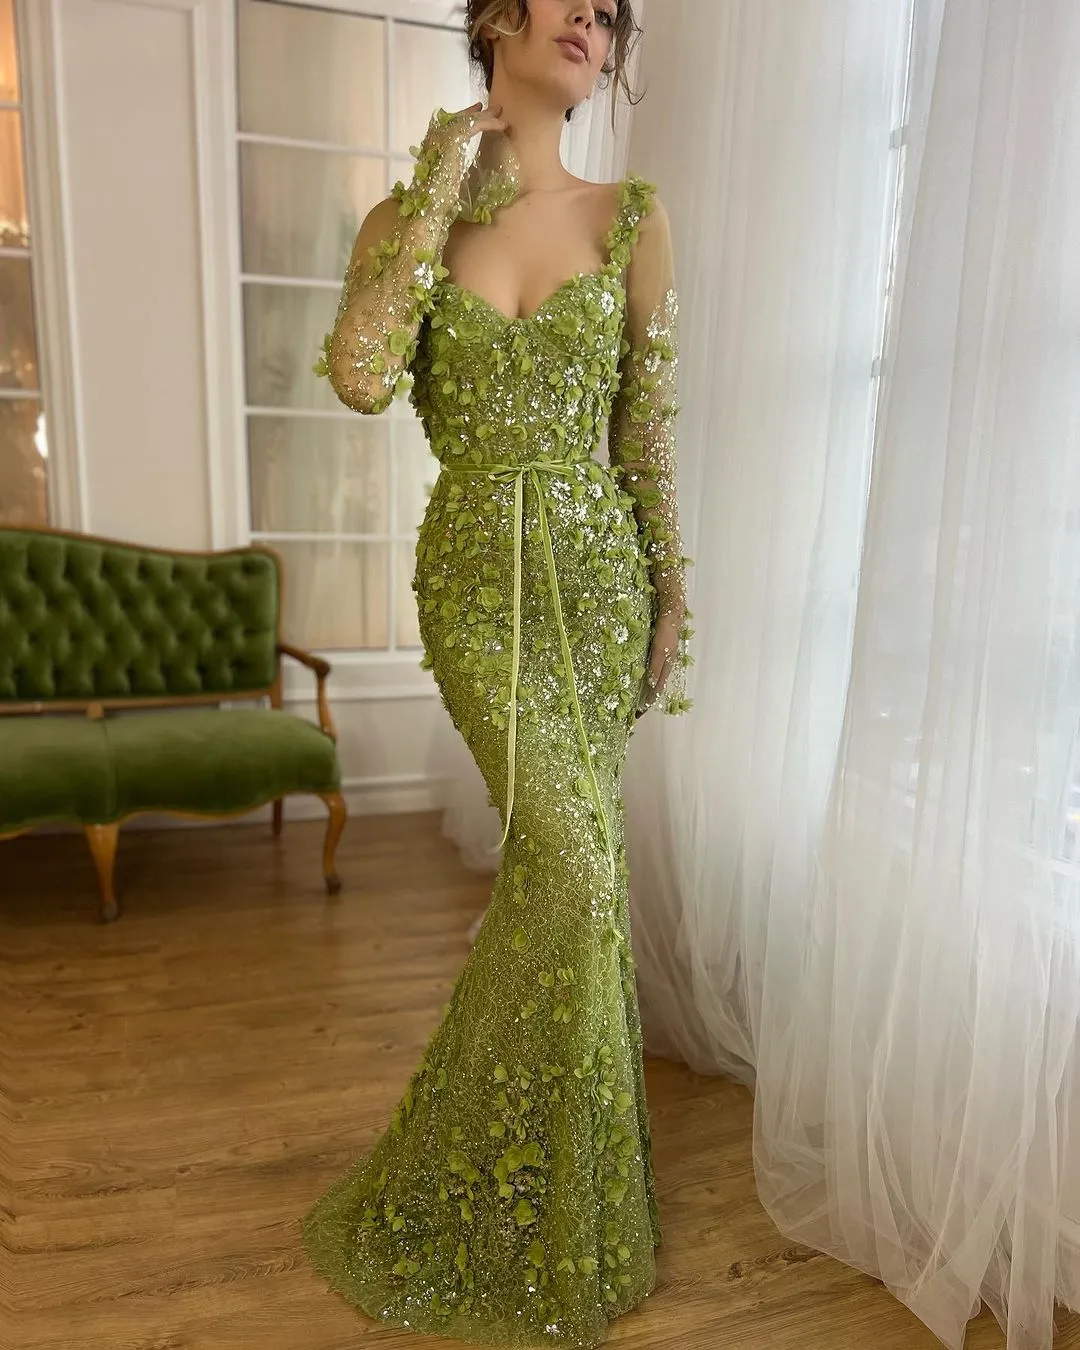 Green A Line Evening Dresses V Neck Long Sleeves High Neck Prom Dress 3D Flowers Beads Special Occasion Gowns